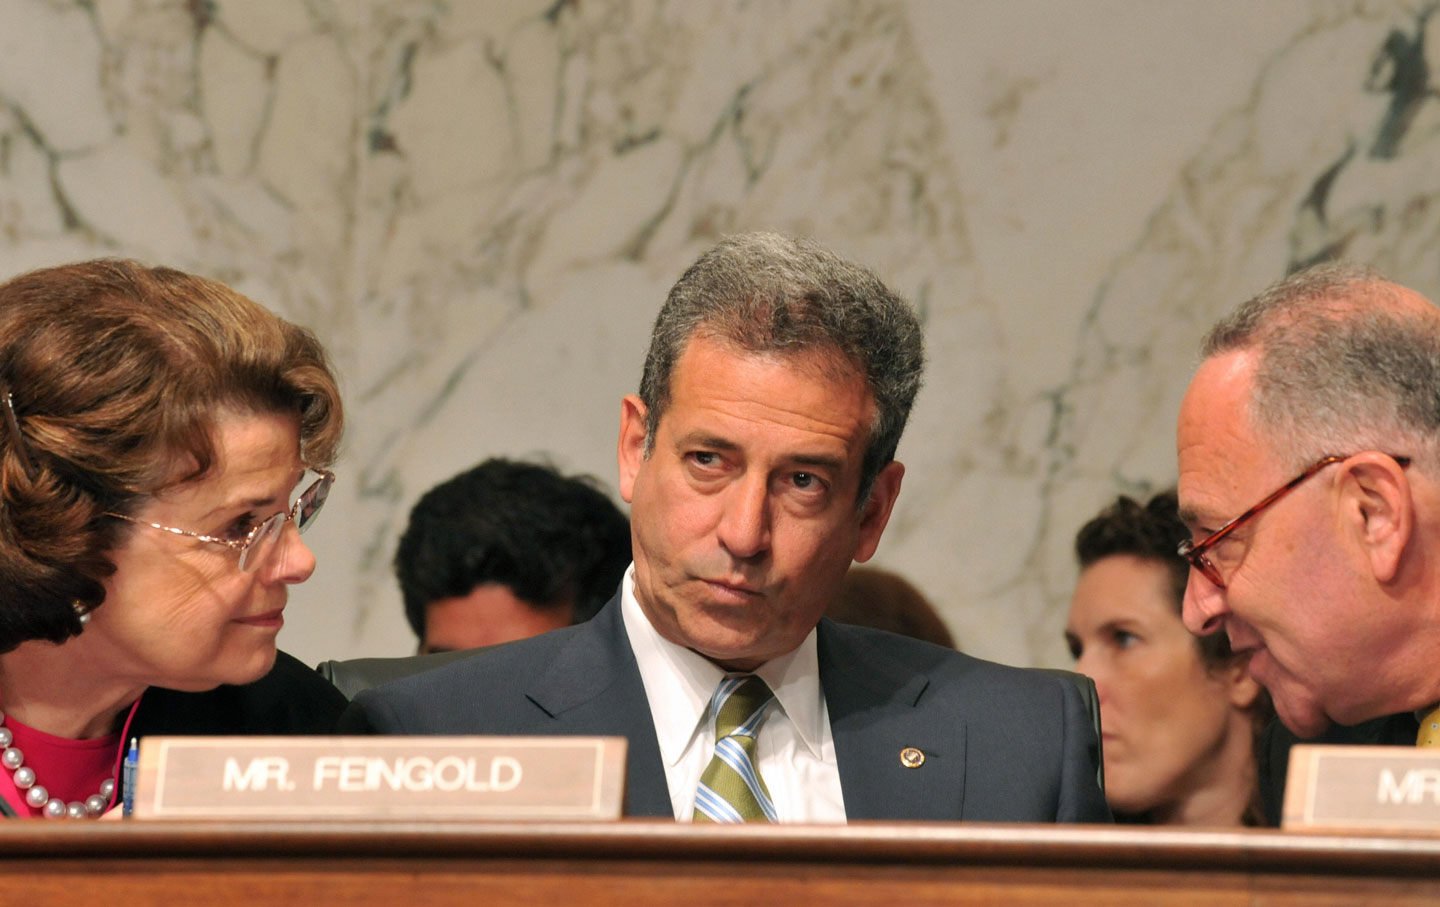 Russ Feingold on Why We Need to Talk About Expanding the Supreme Court